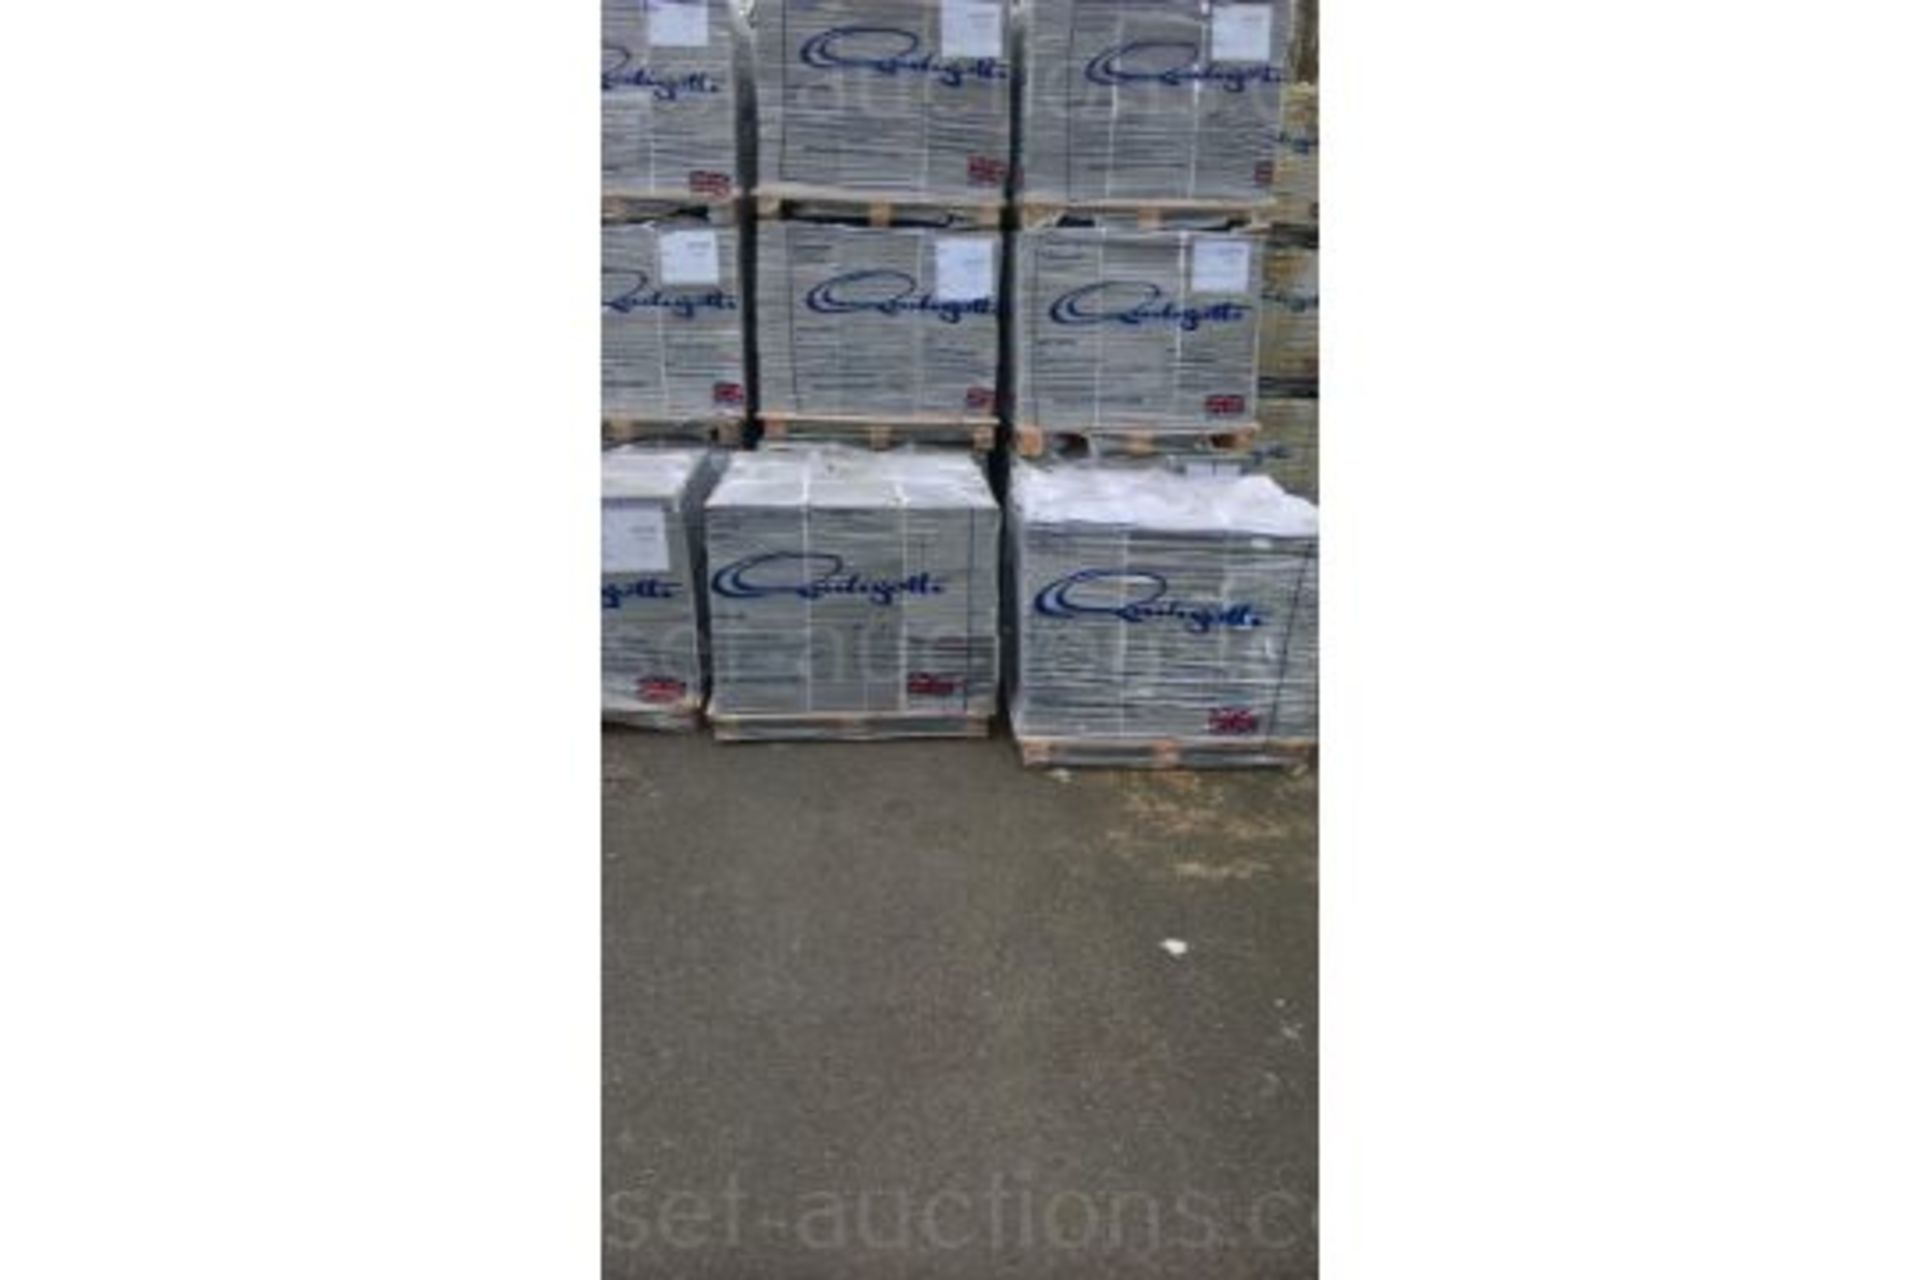 1 PALLET OF BRAND NEW GREY TERRAZZO COMMERCIAL TILES Z30099, COVERS 24 SQUARE YARDS *PLUS VAT* - Image 4 of 6